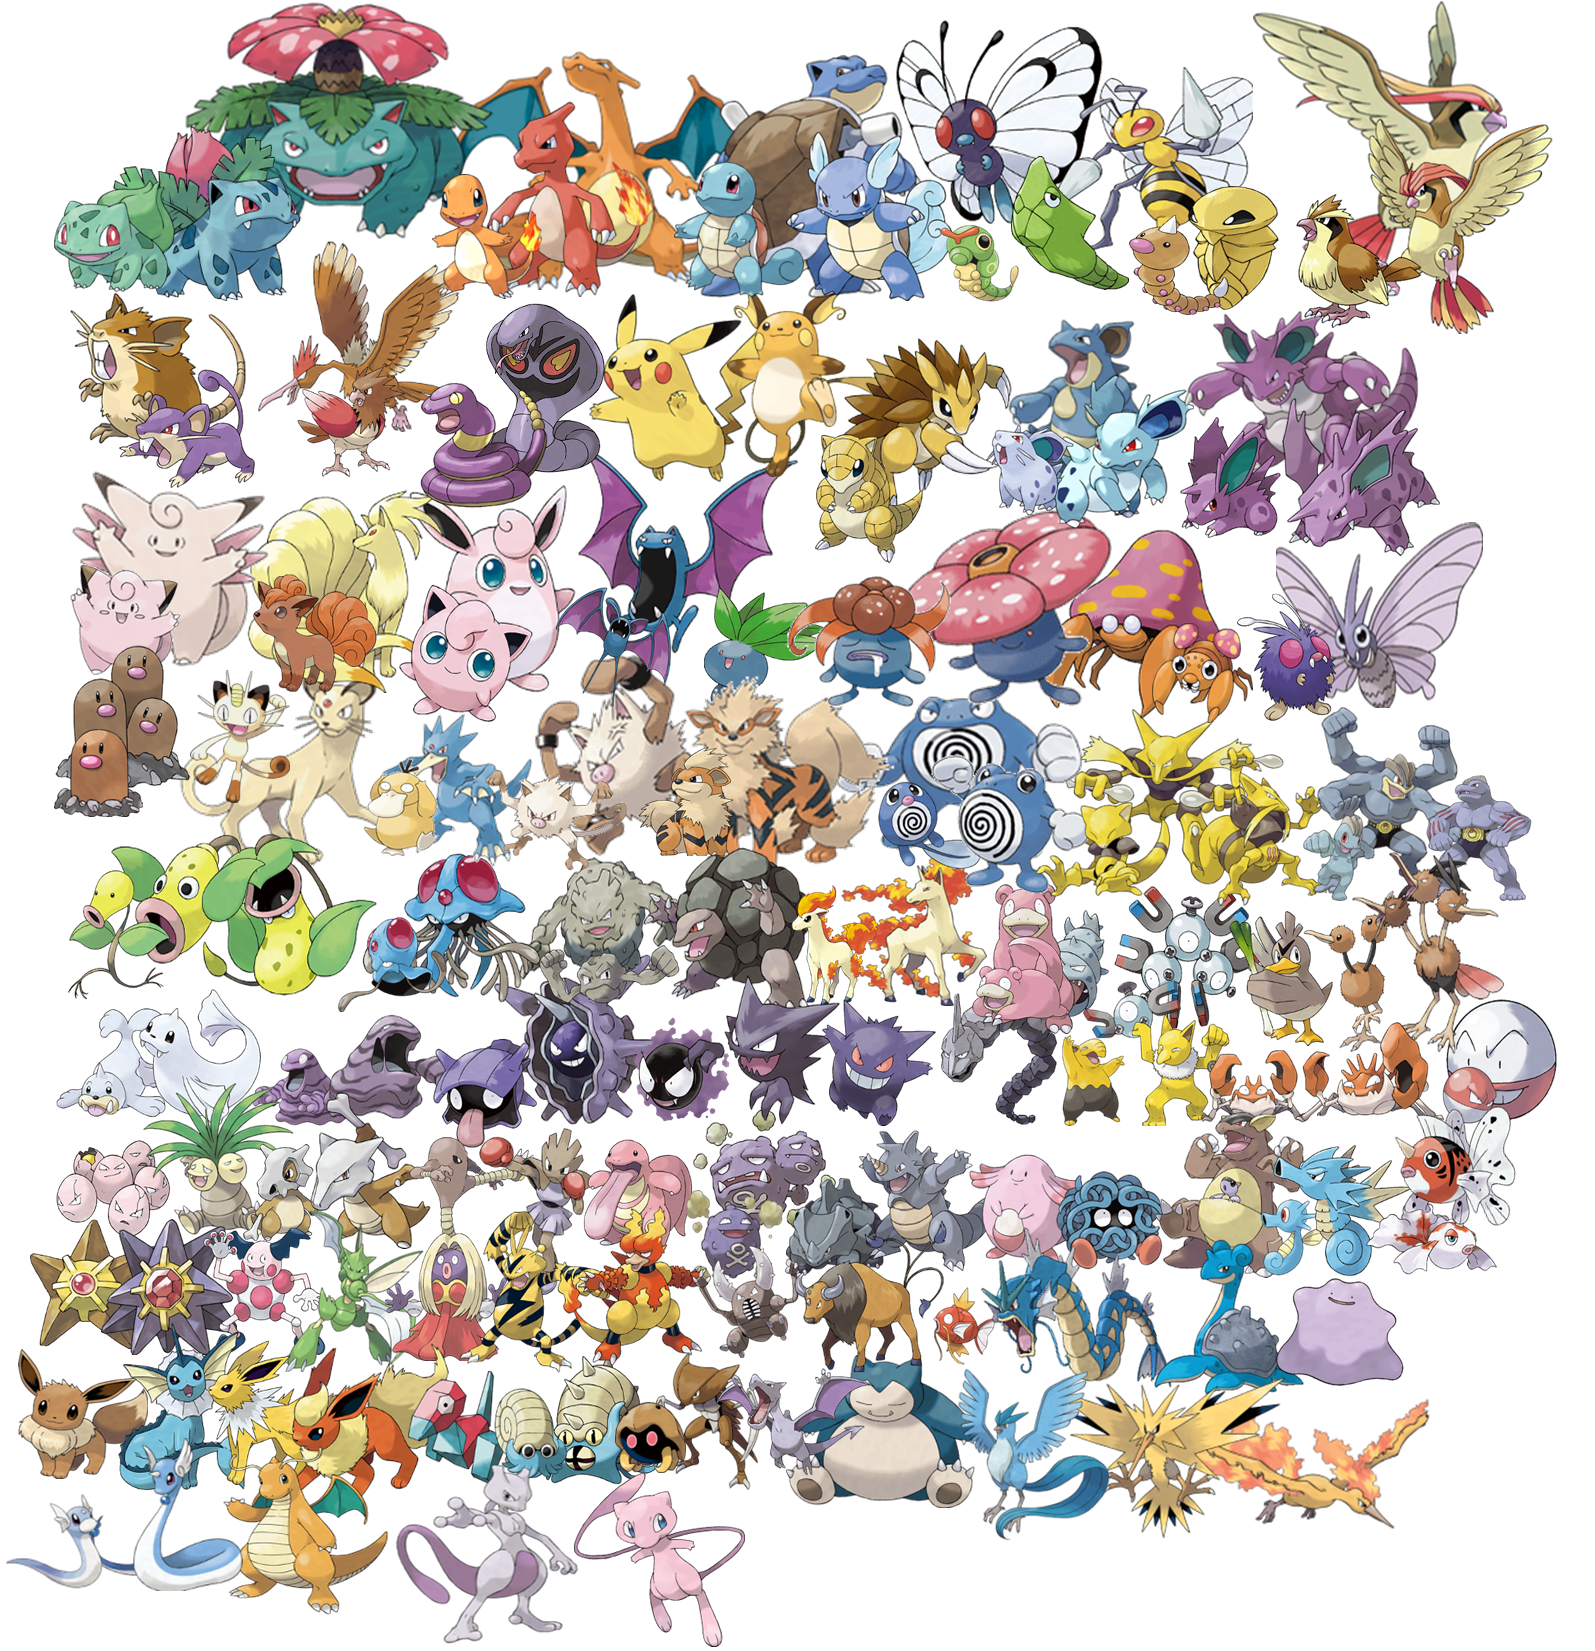 What’s Your Favorite Addition to the Original 151 Pokémon?